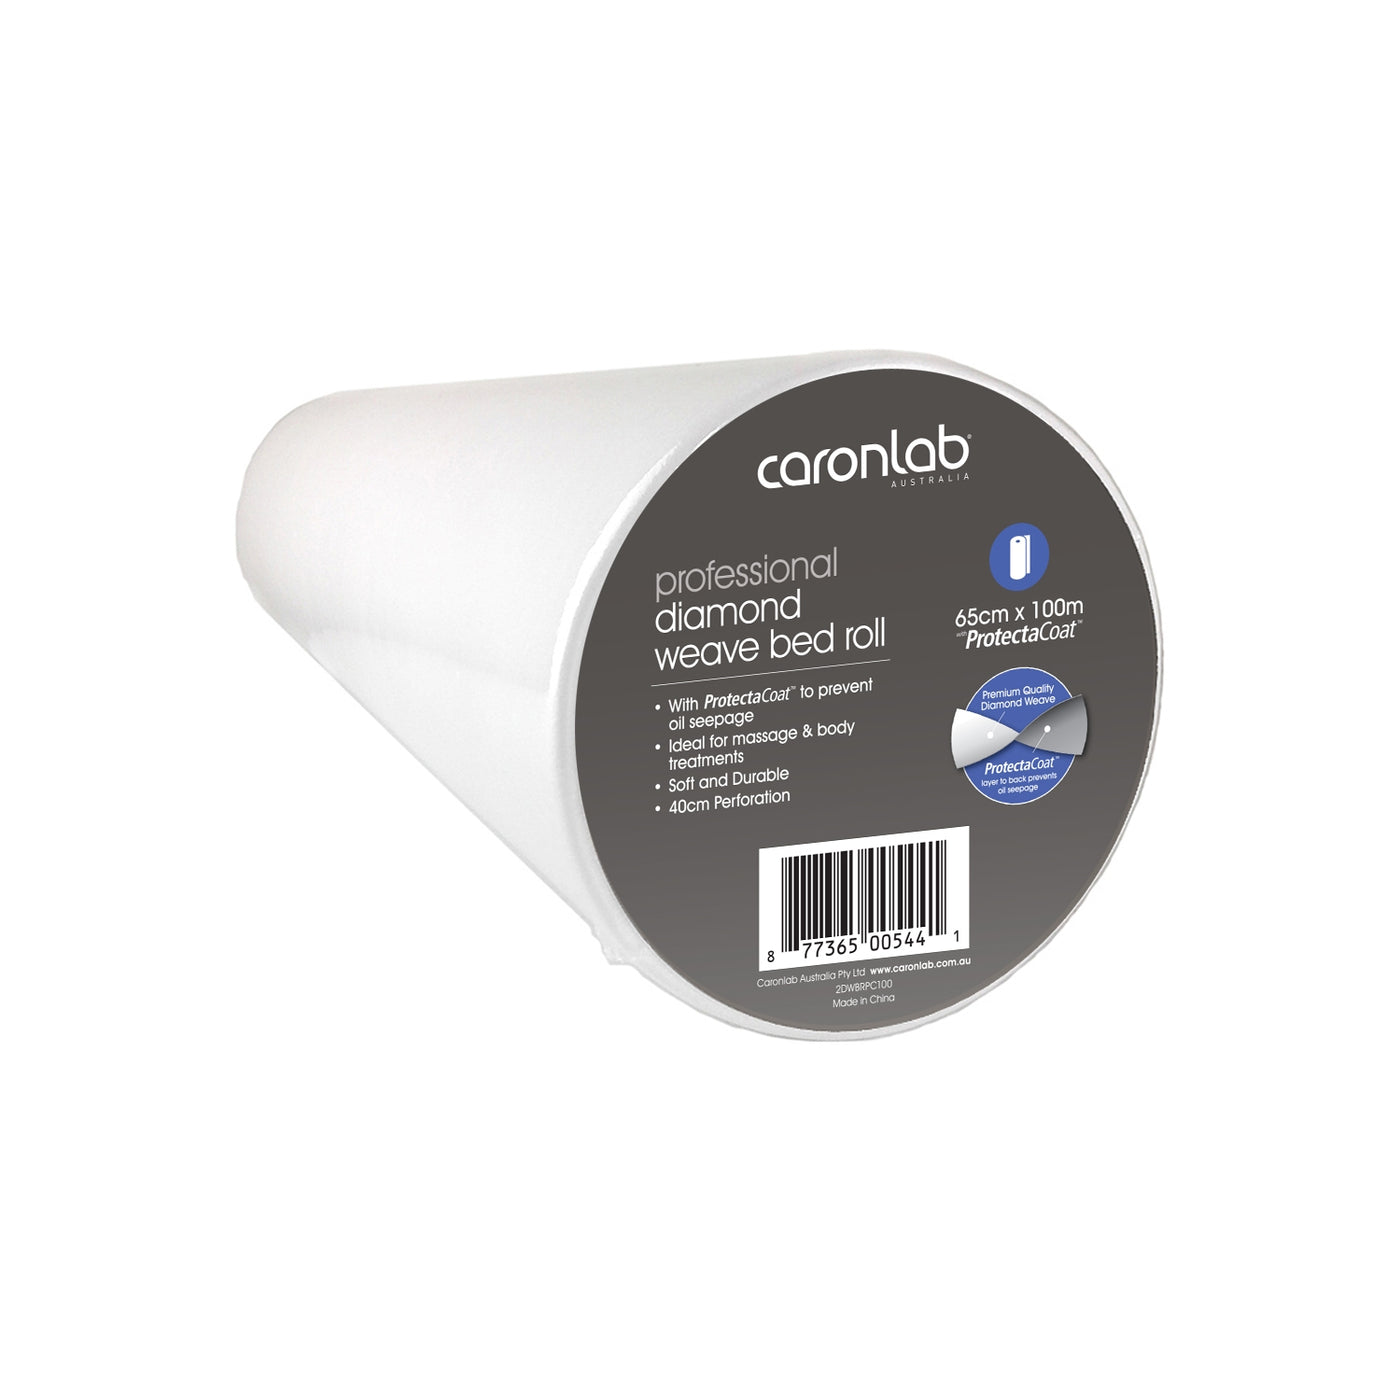 Caronlab Diamond Weave Bed Roll with Protectacoat 65cm x 100m